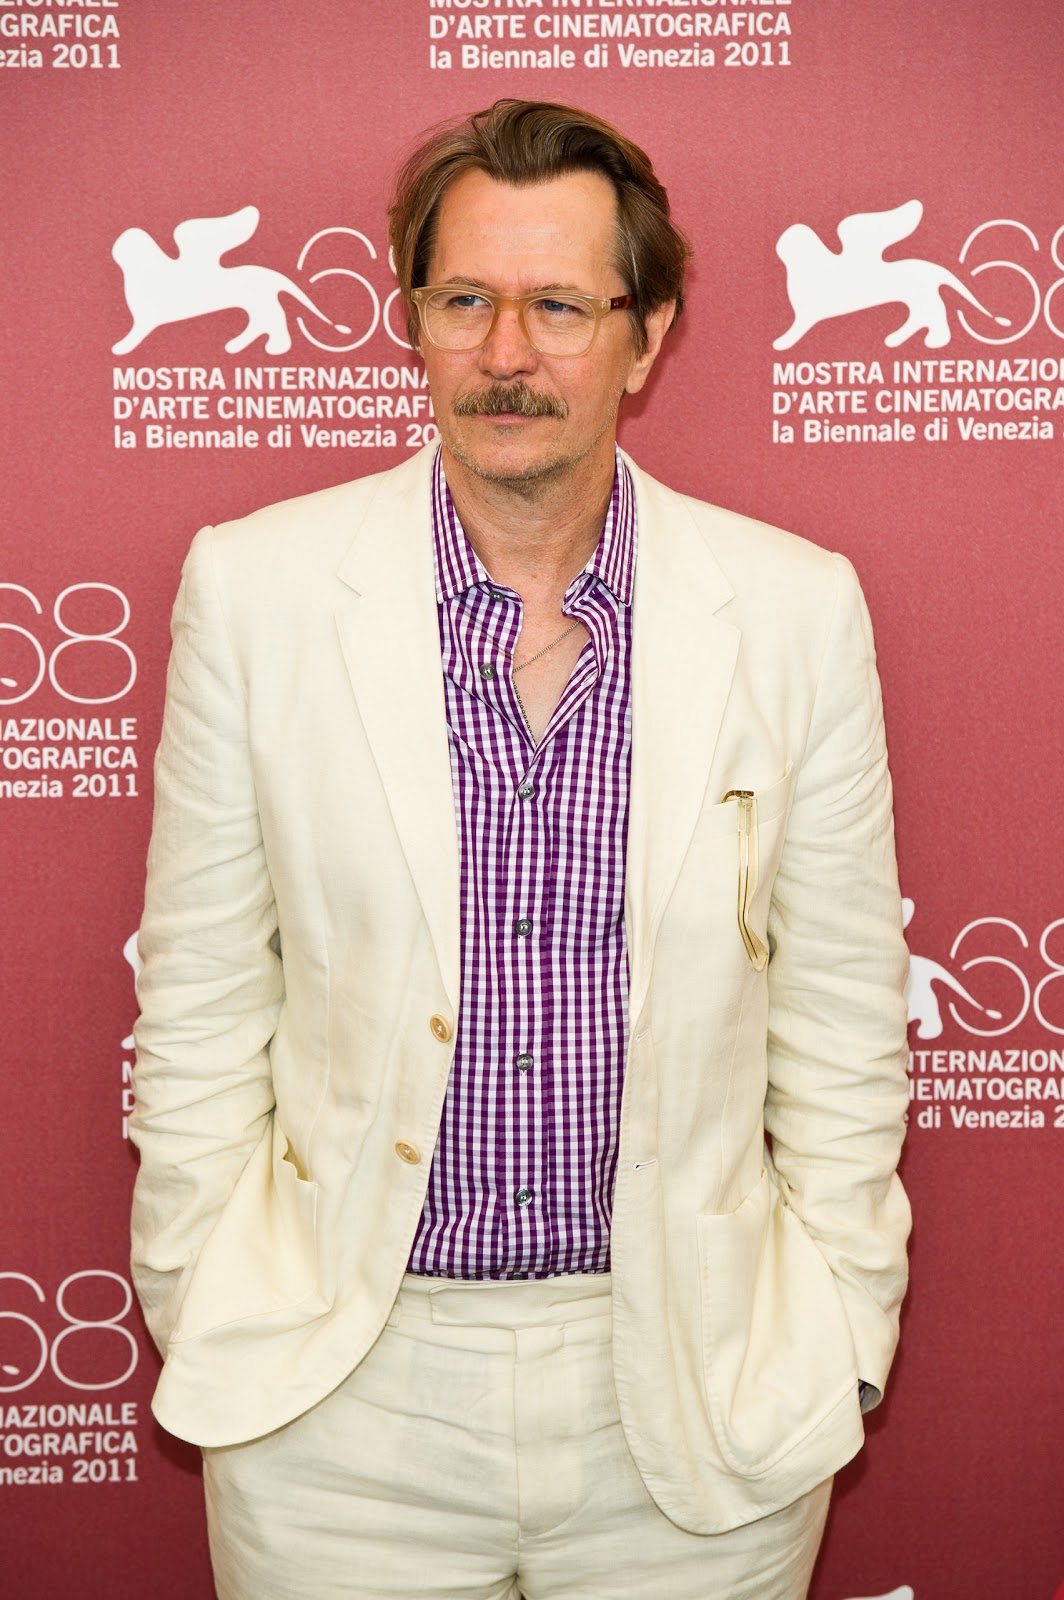 http://3.bp.blogspot.com/-9VXLy0dq99A/TncsRVe8_OI/AAAAAAAABo0/Bh2Nta2SWlw/s1600/Gary+Oldman+-+Photo+by+Ian+Gavan+-+Getty+Images+for+Jaeger+LeCoultre.jpg